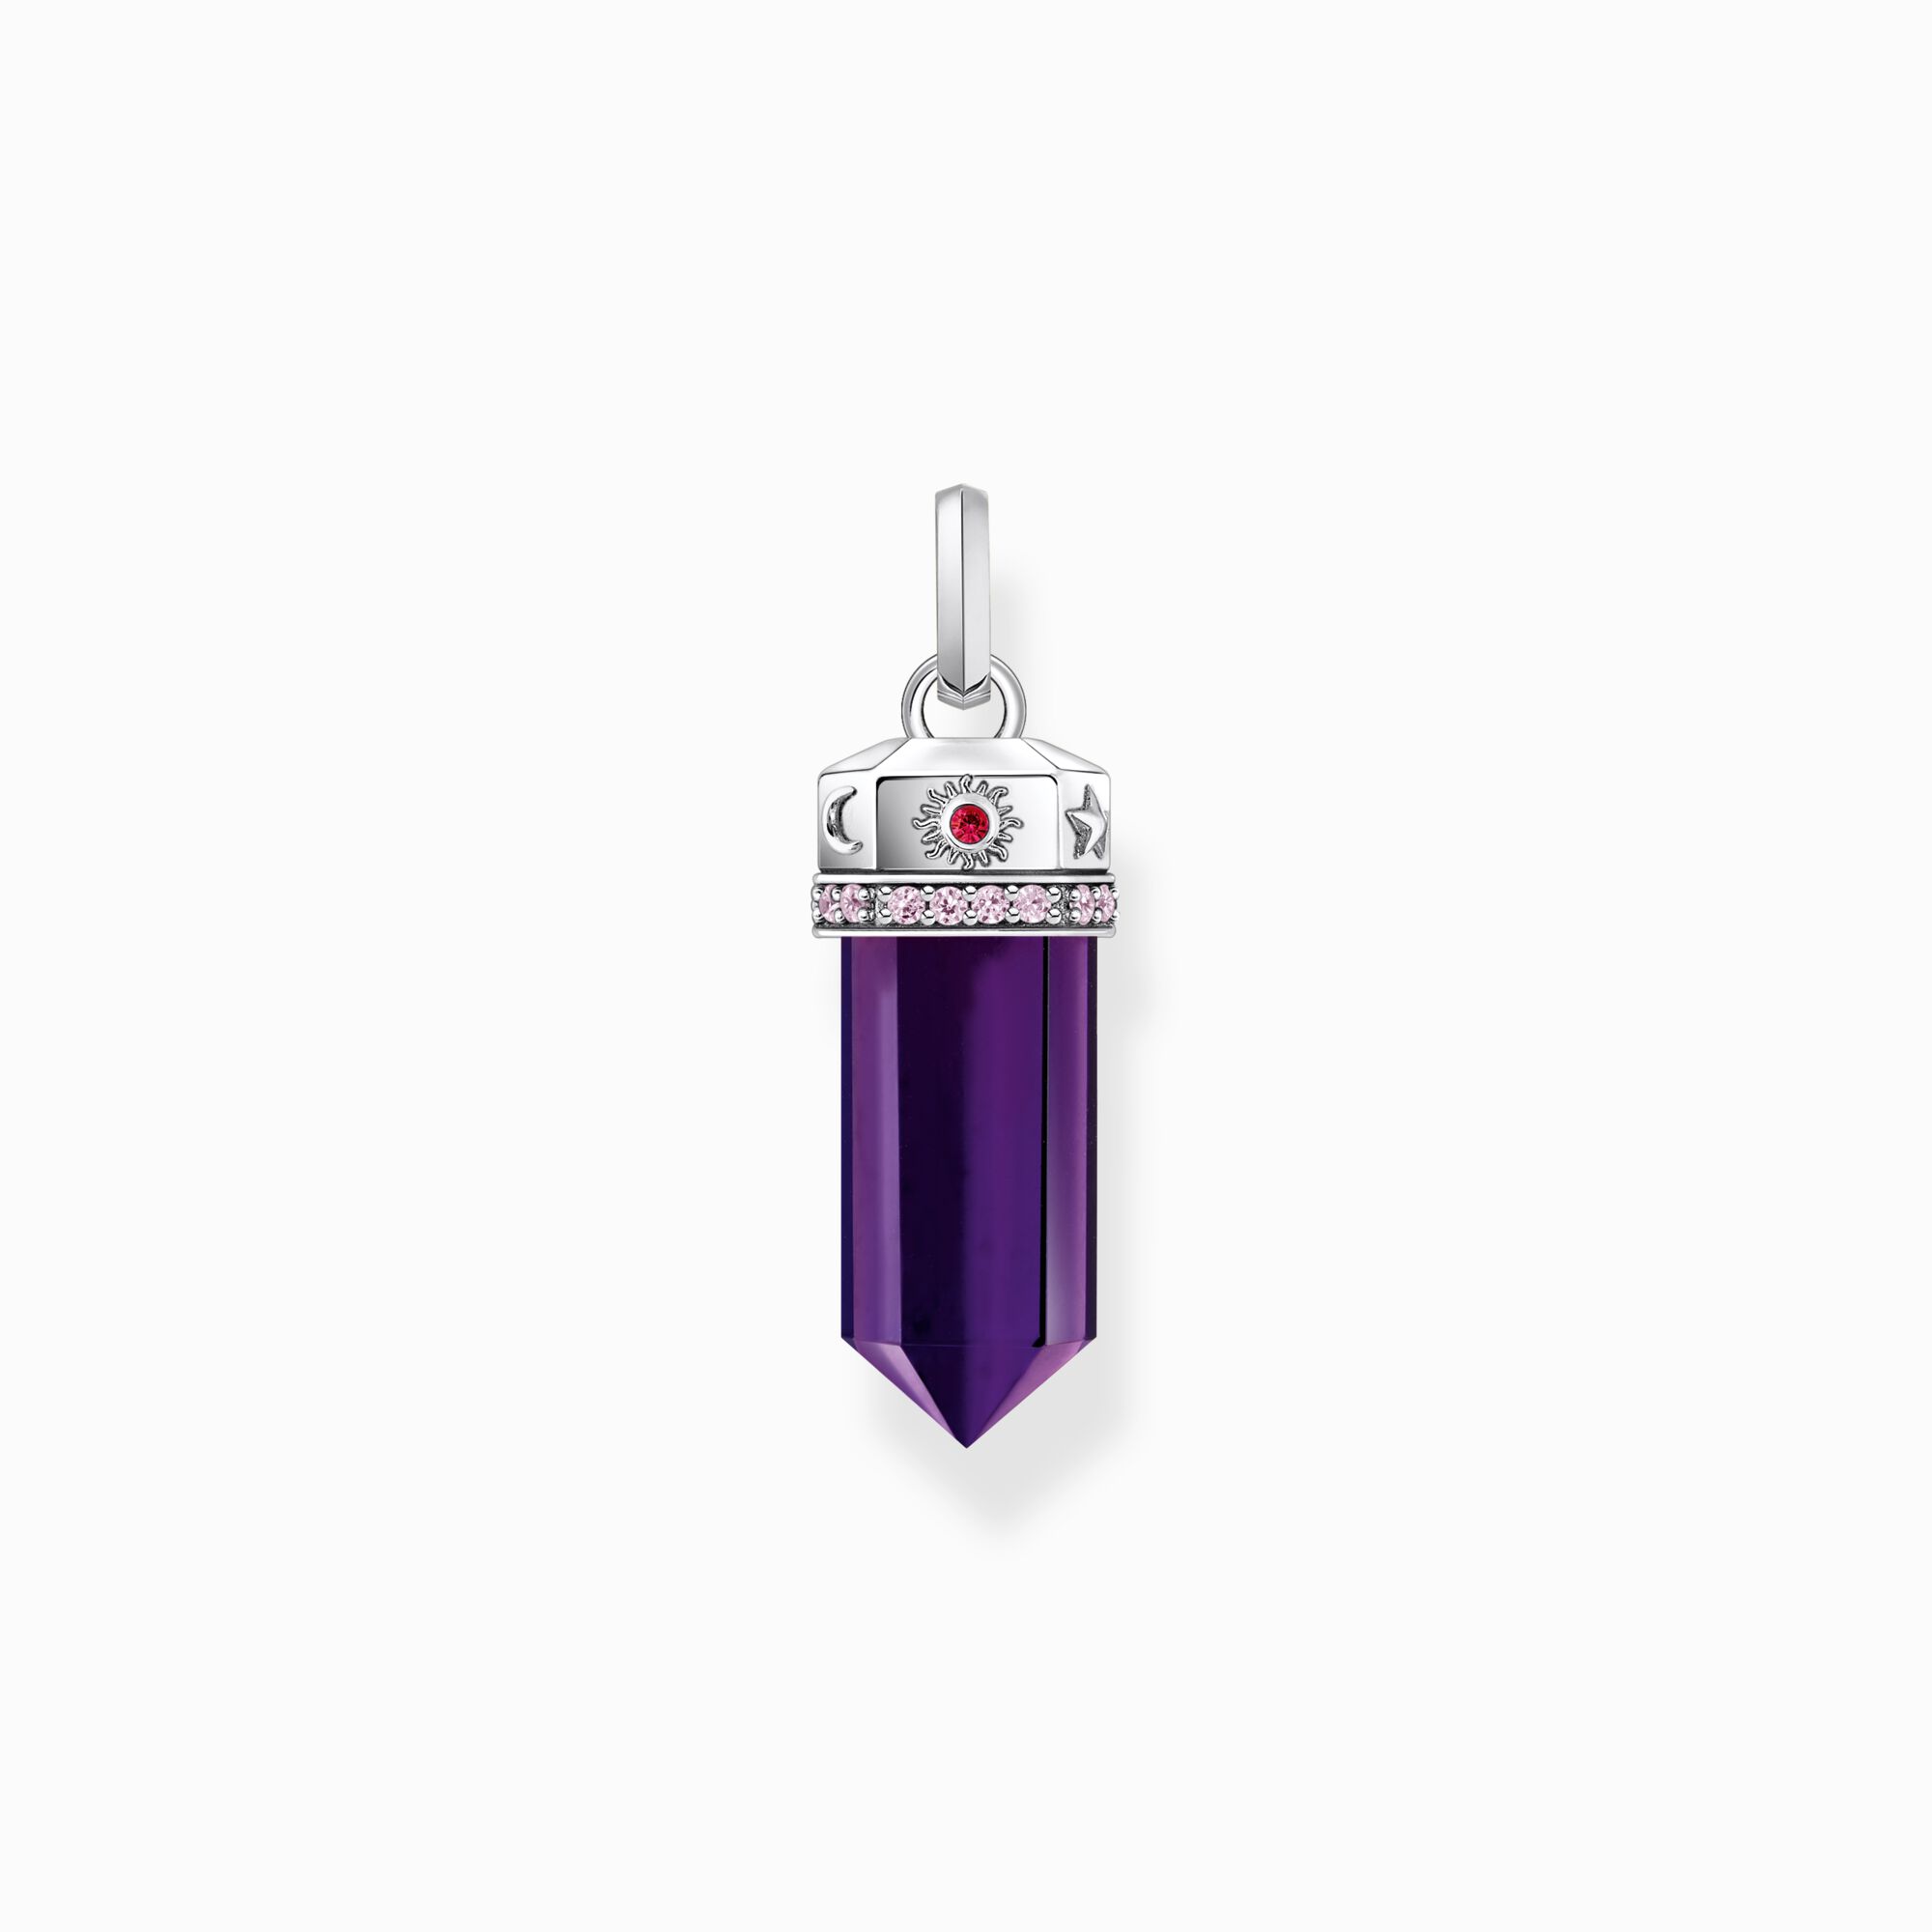 Silver blackened pendant with imitation amethyst from the  collection in the THOMAS SABO online store